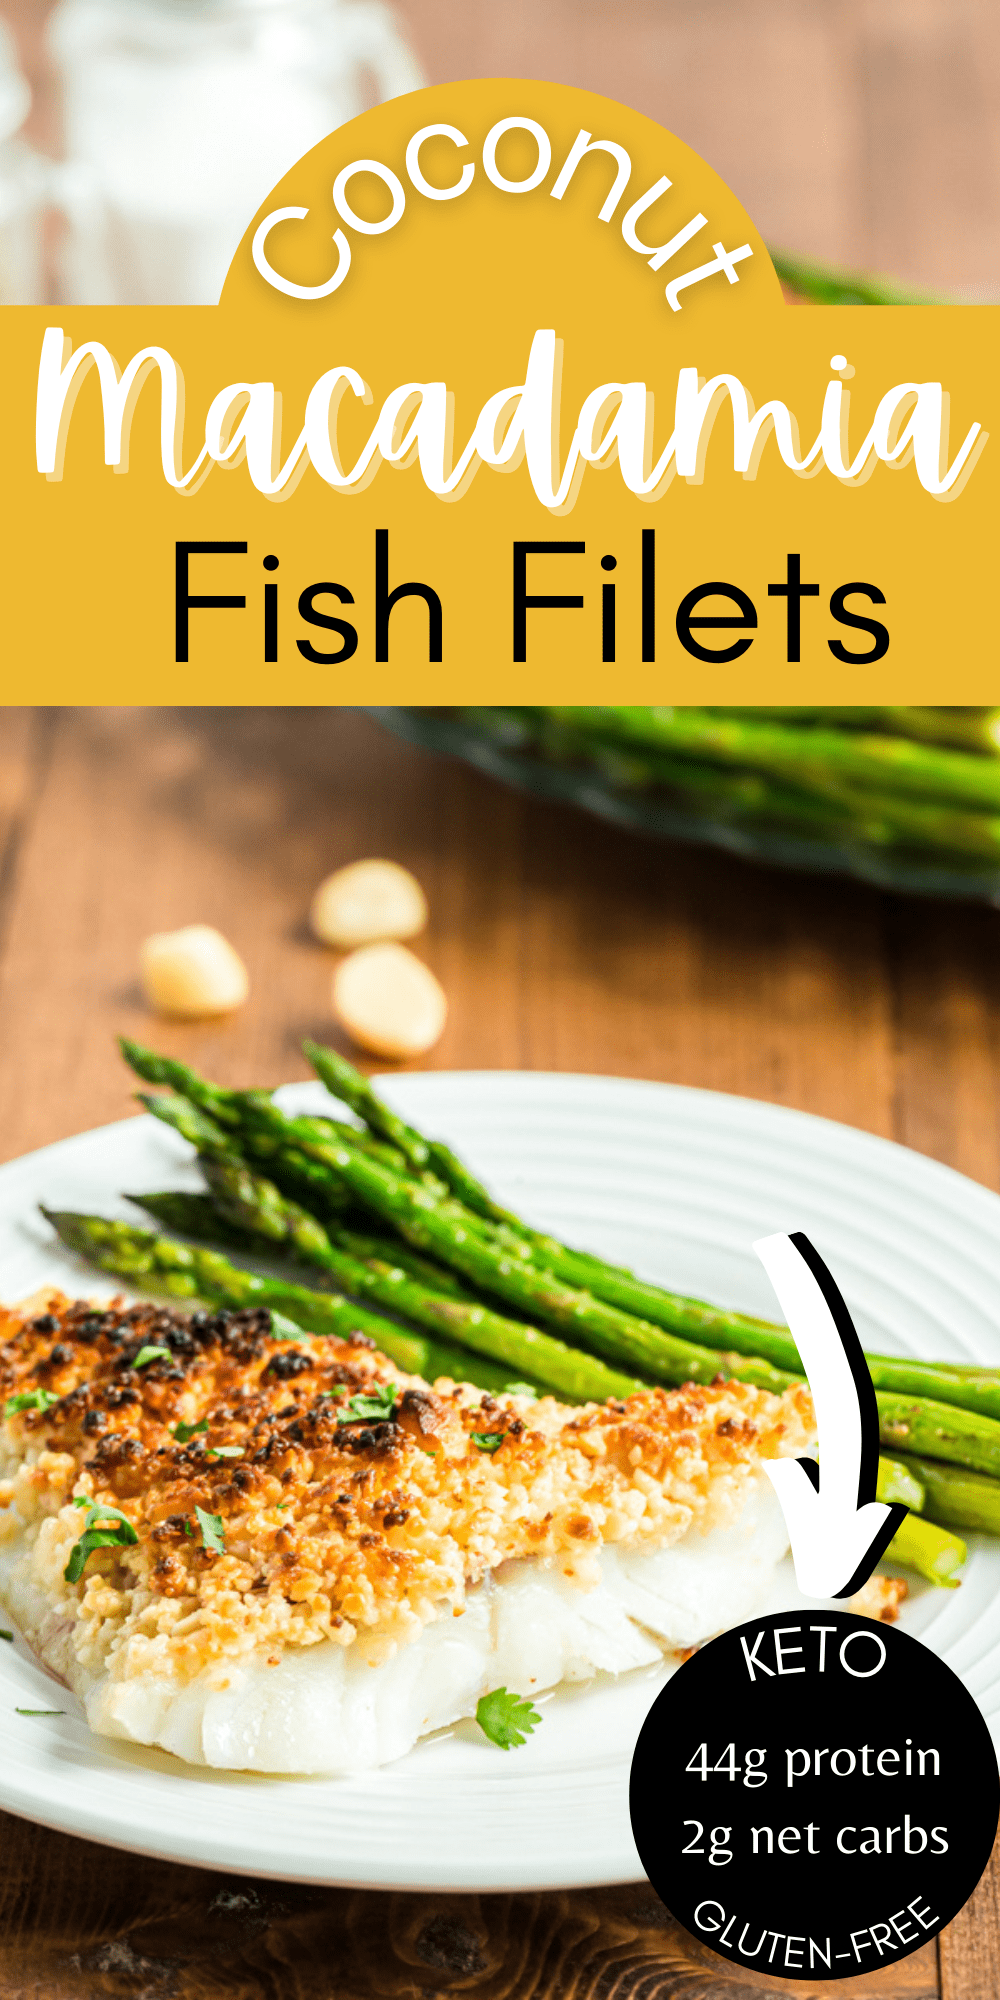 Pinterest graphic with image of Oven Baked Coconut Macadamia Fish Filletson it.